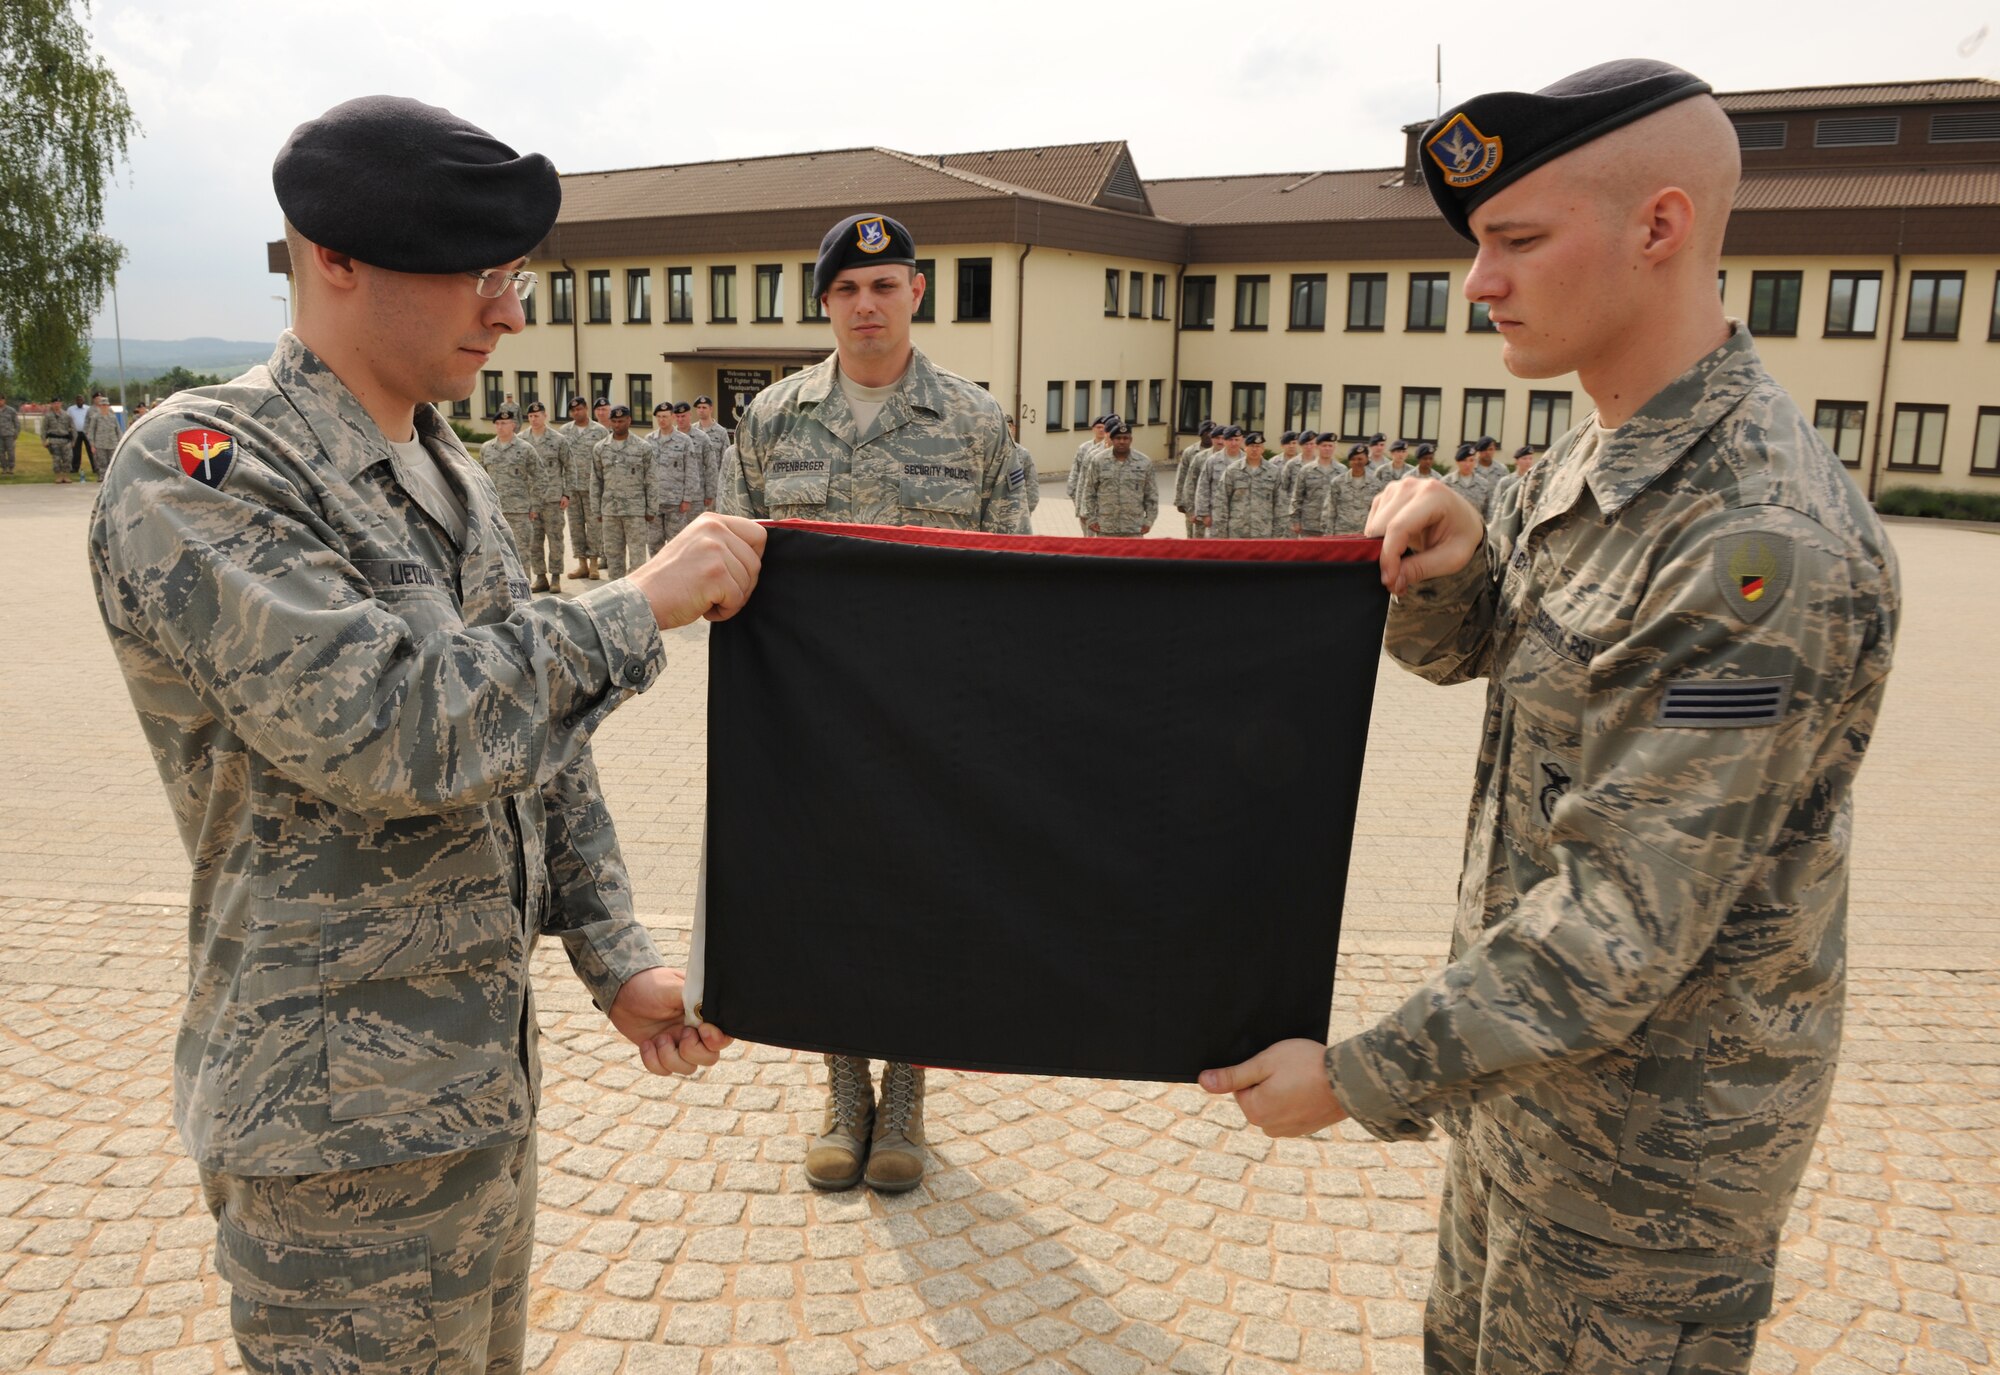 SPANGDAHLEM AIR BASE, Germany – German security police officers from the 52nd Security Forces Squadron fold the German flag during a retreat ceremony here May 20. The retreat ceremony coincided with National Police Week, which honors law enforcement members who have lost their lives in the line of duty for the safety and protection of others. (U.S. Air Force photo/Senior Airman Nathanael Callon)